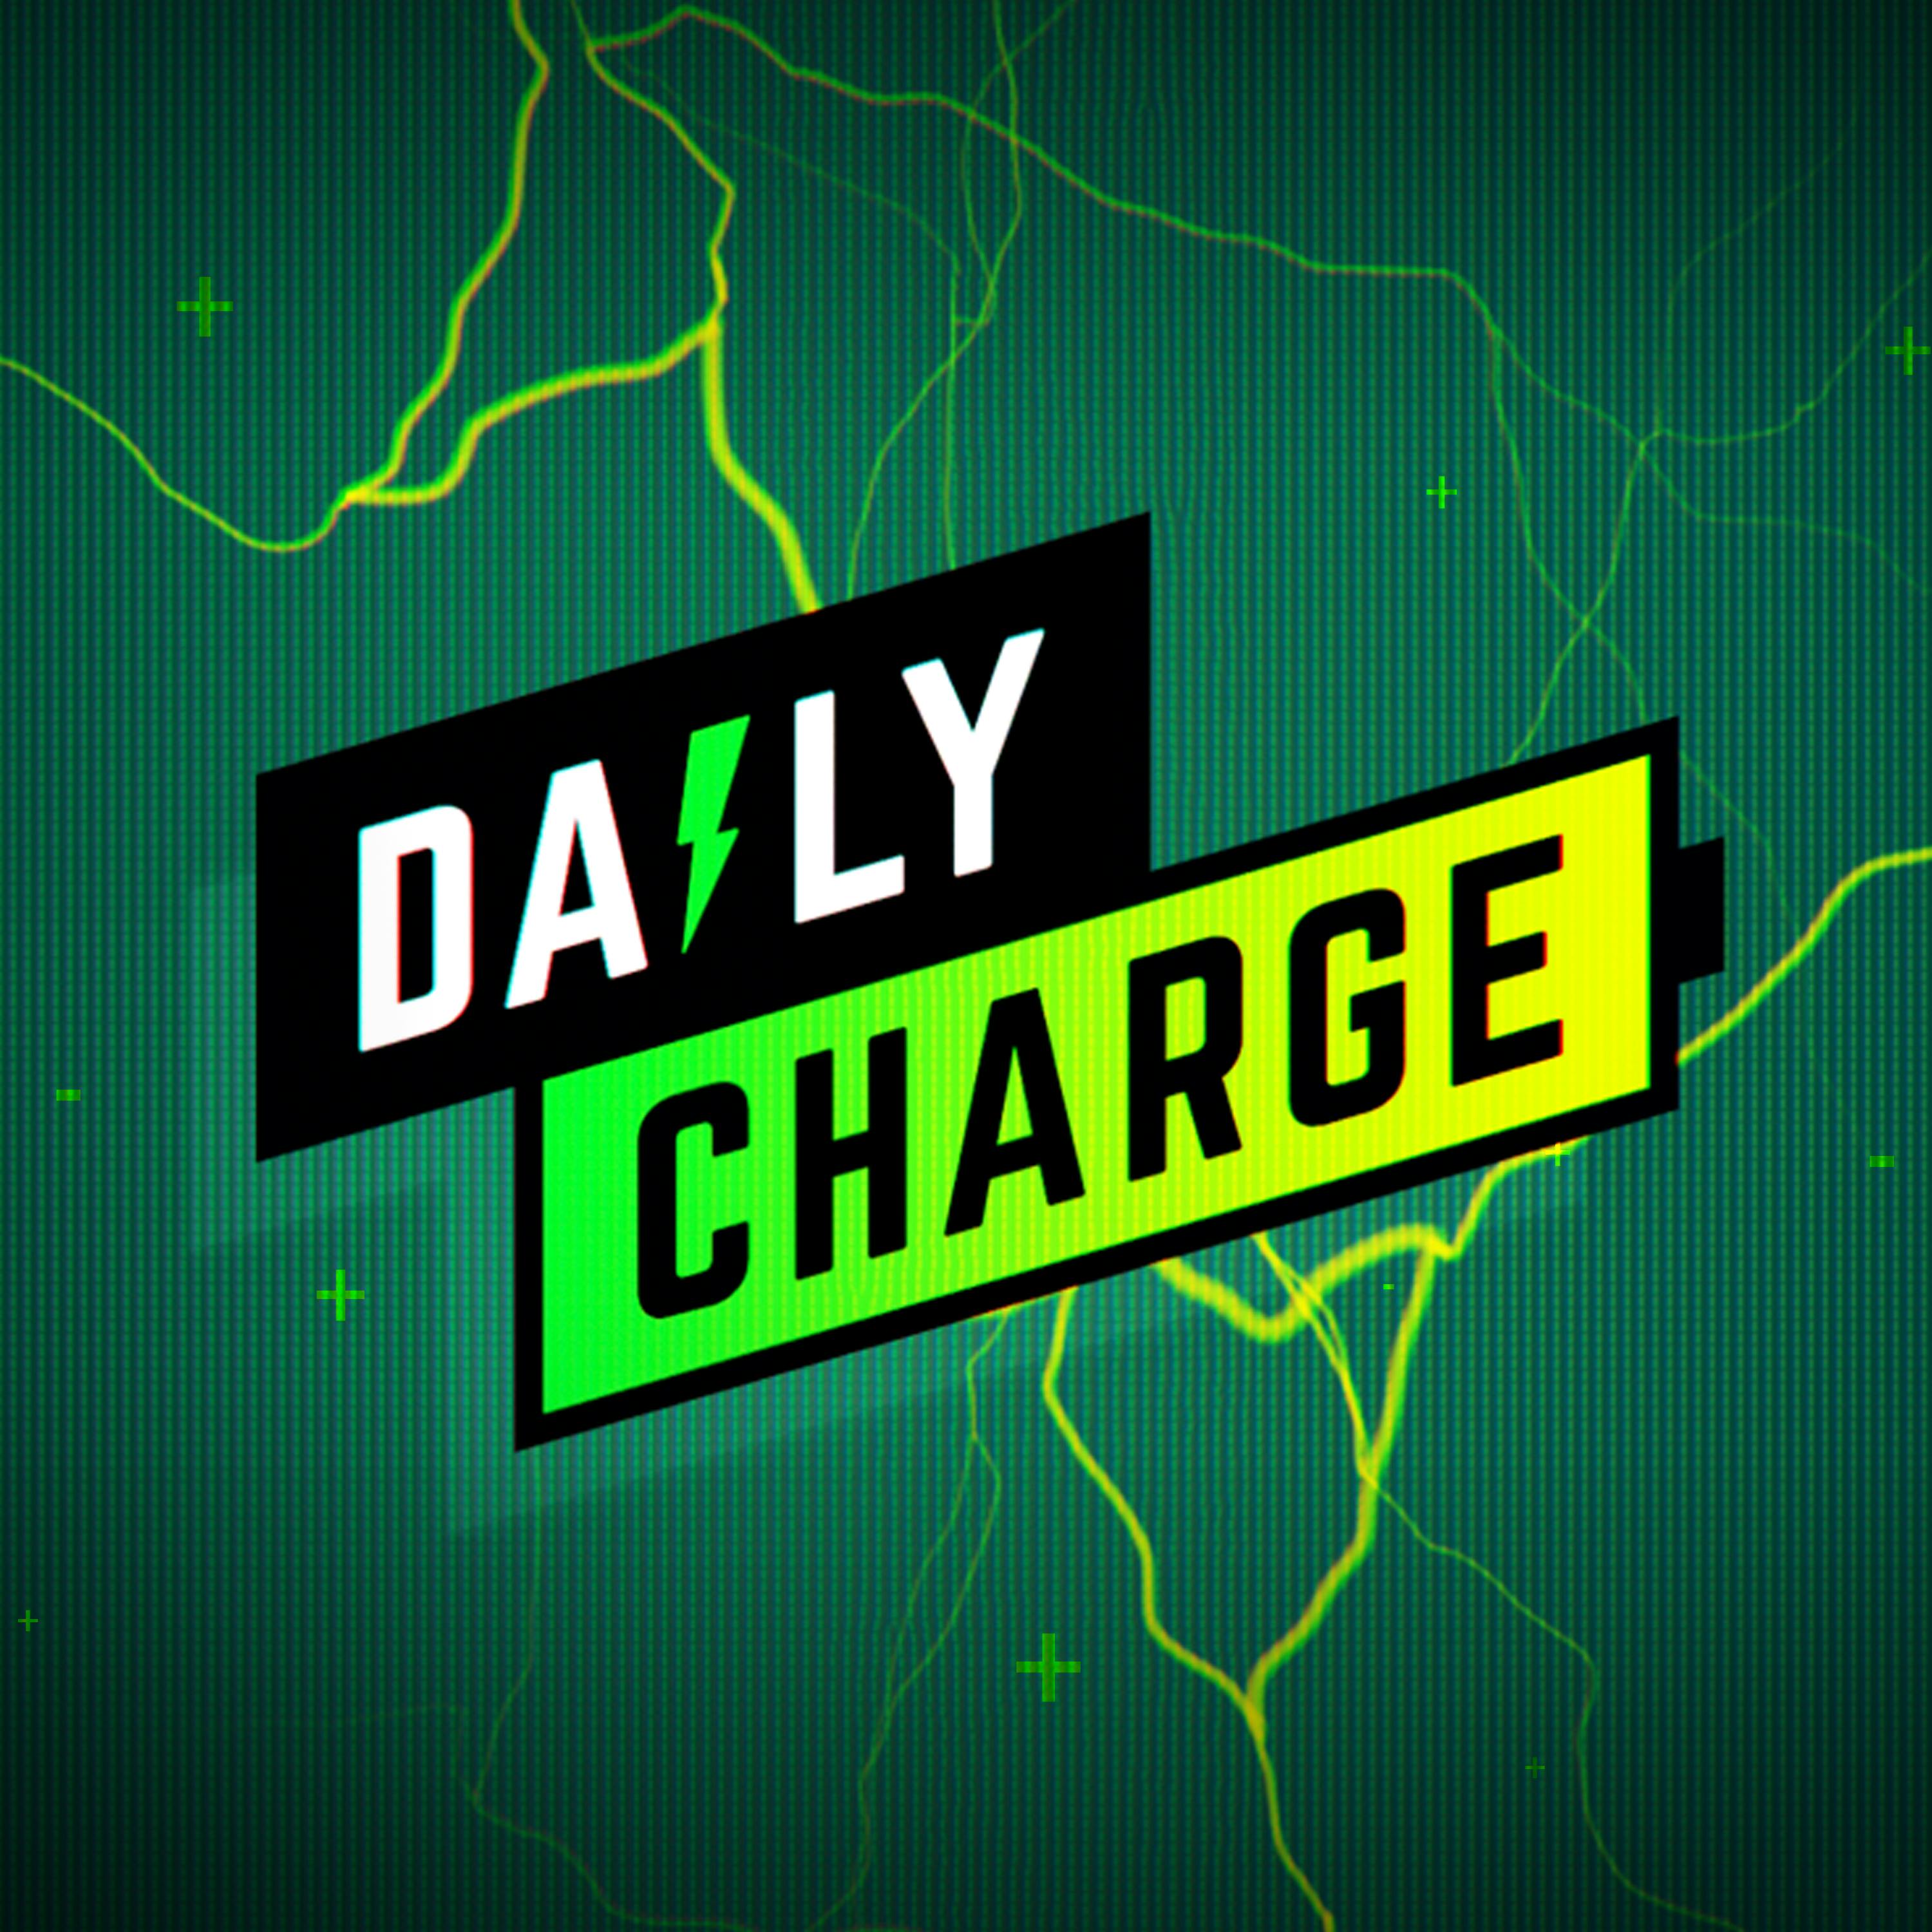 Playstation Plus is Sony’s Answer to Xbox Game Pass (The Daily Charge, 3/29/2022)